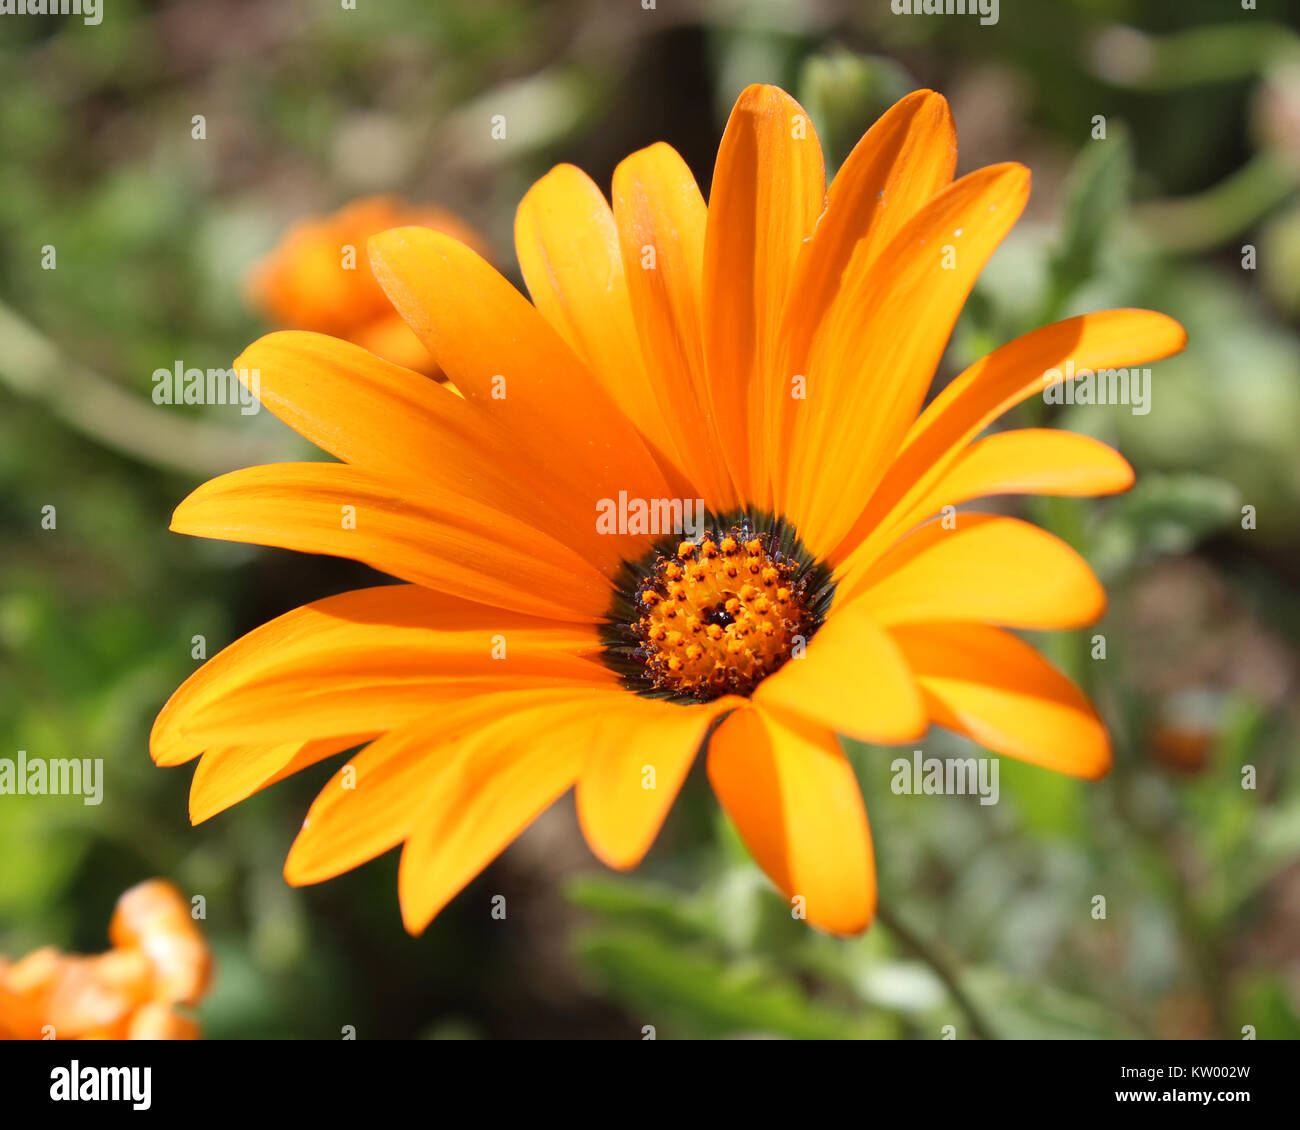 The vibrant orange flower of an Osteospermum also known as African or Cape daisy. Stock Photo